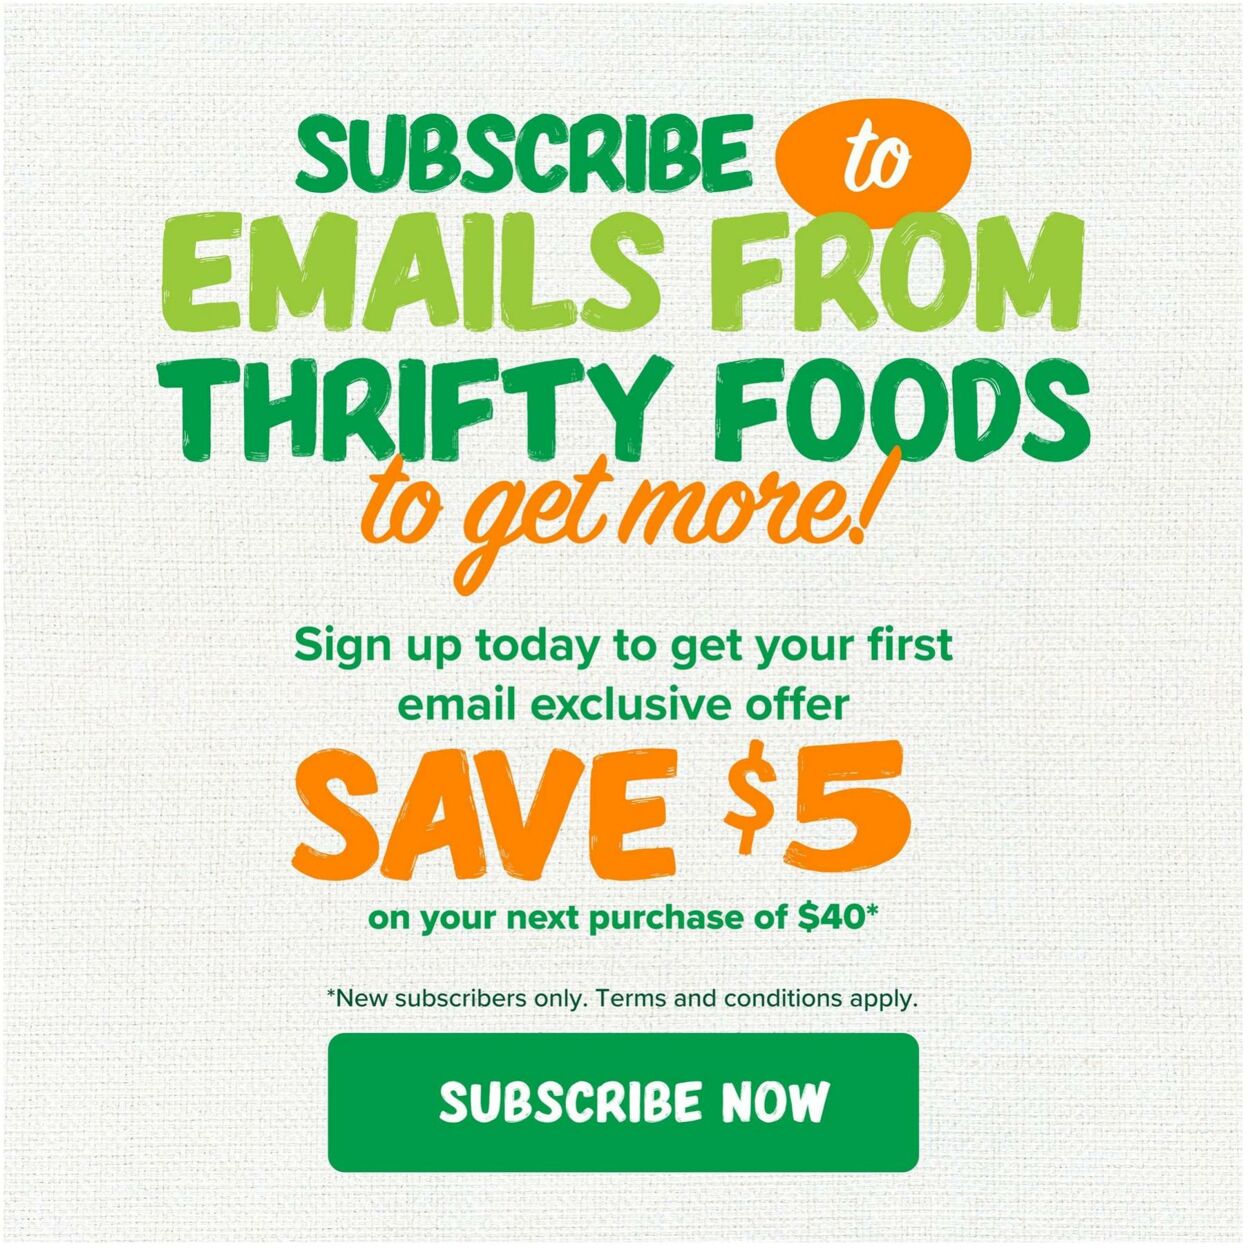 Circulaire Thrifty Foods 18.01.2024 - 24.01.2024